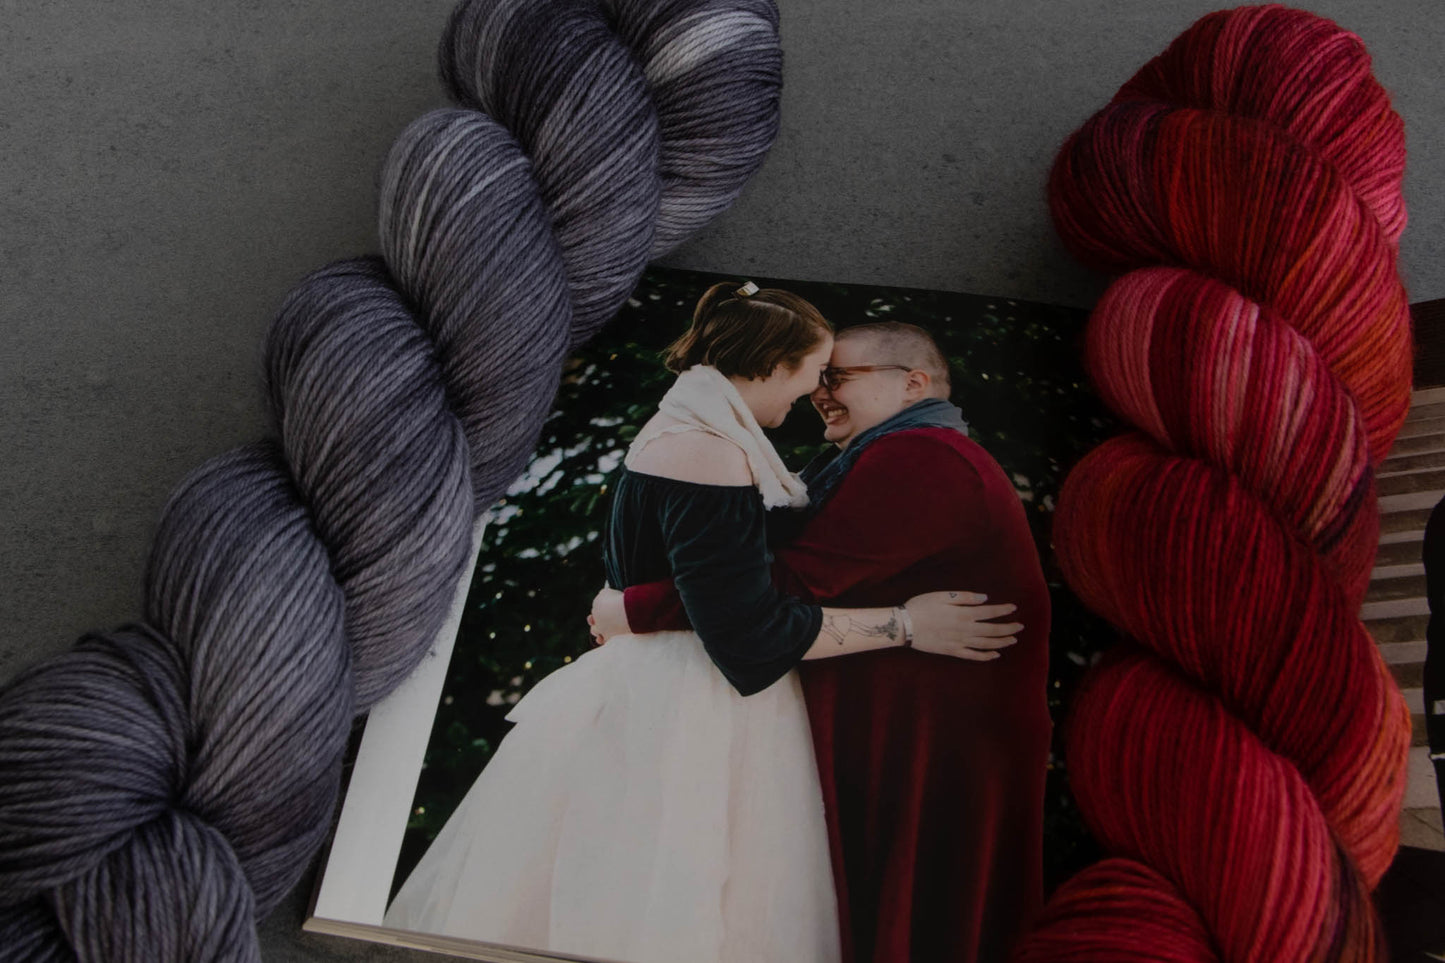 A skein of Pixie's Nose yarn with its companion variegated red, pink, and plum colorway and a photo from Cat and Penny's engagement shoot.